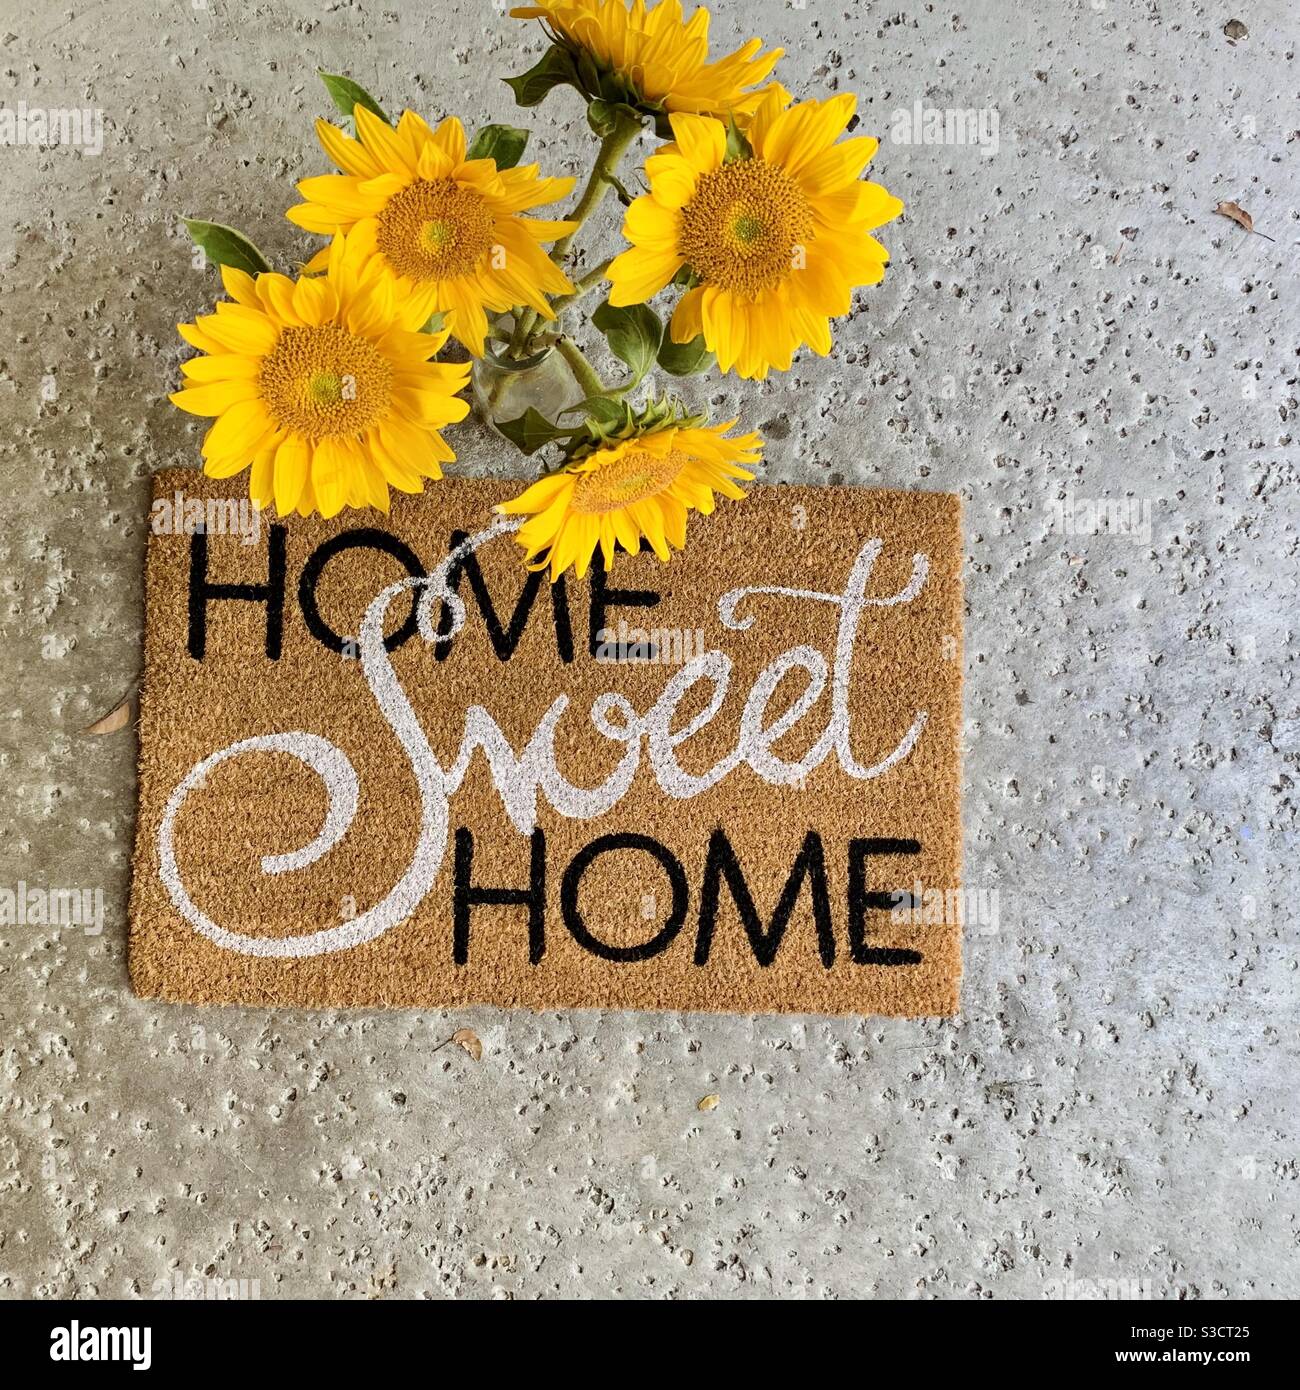 https://c8.alamy.com/comp/S3CT25/home-sweet-home-doormat-and-sunflowers-in-a-vase-S3CT25.jpg